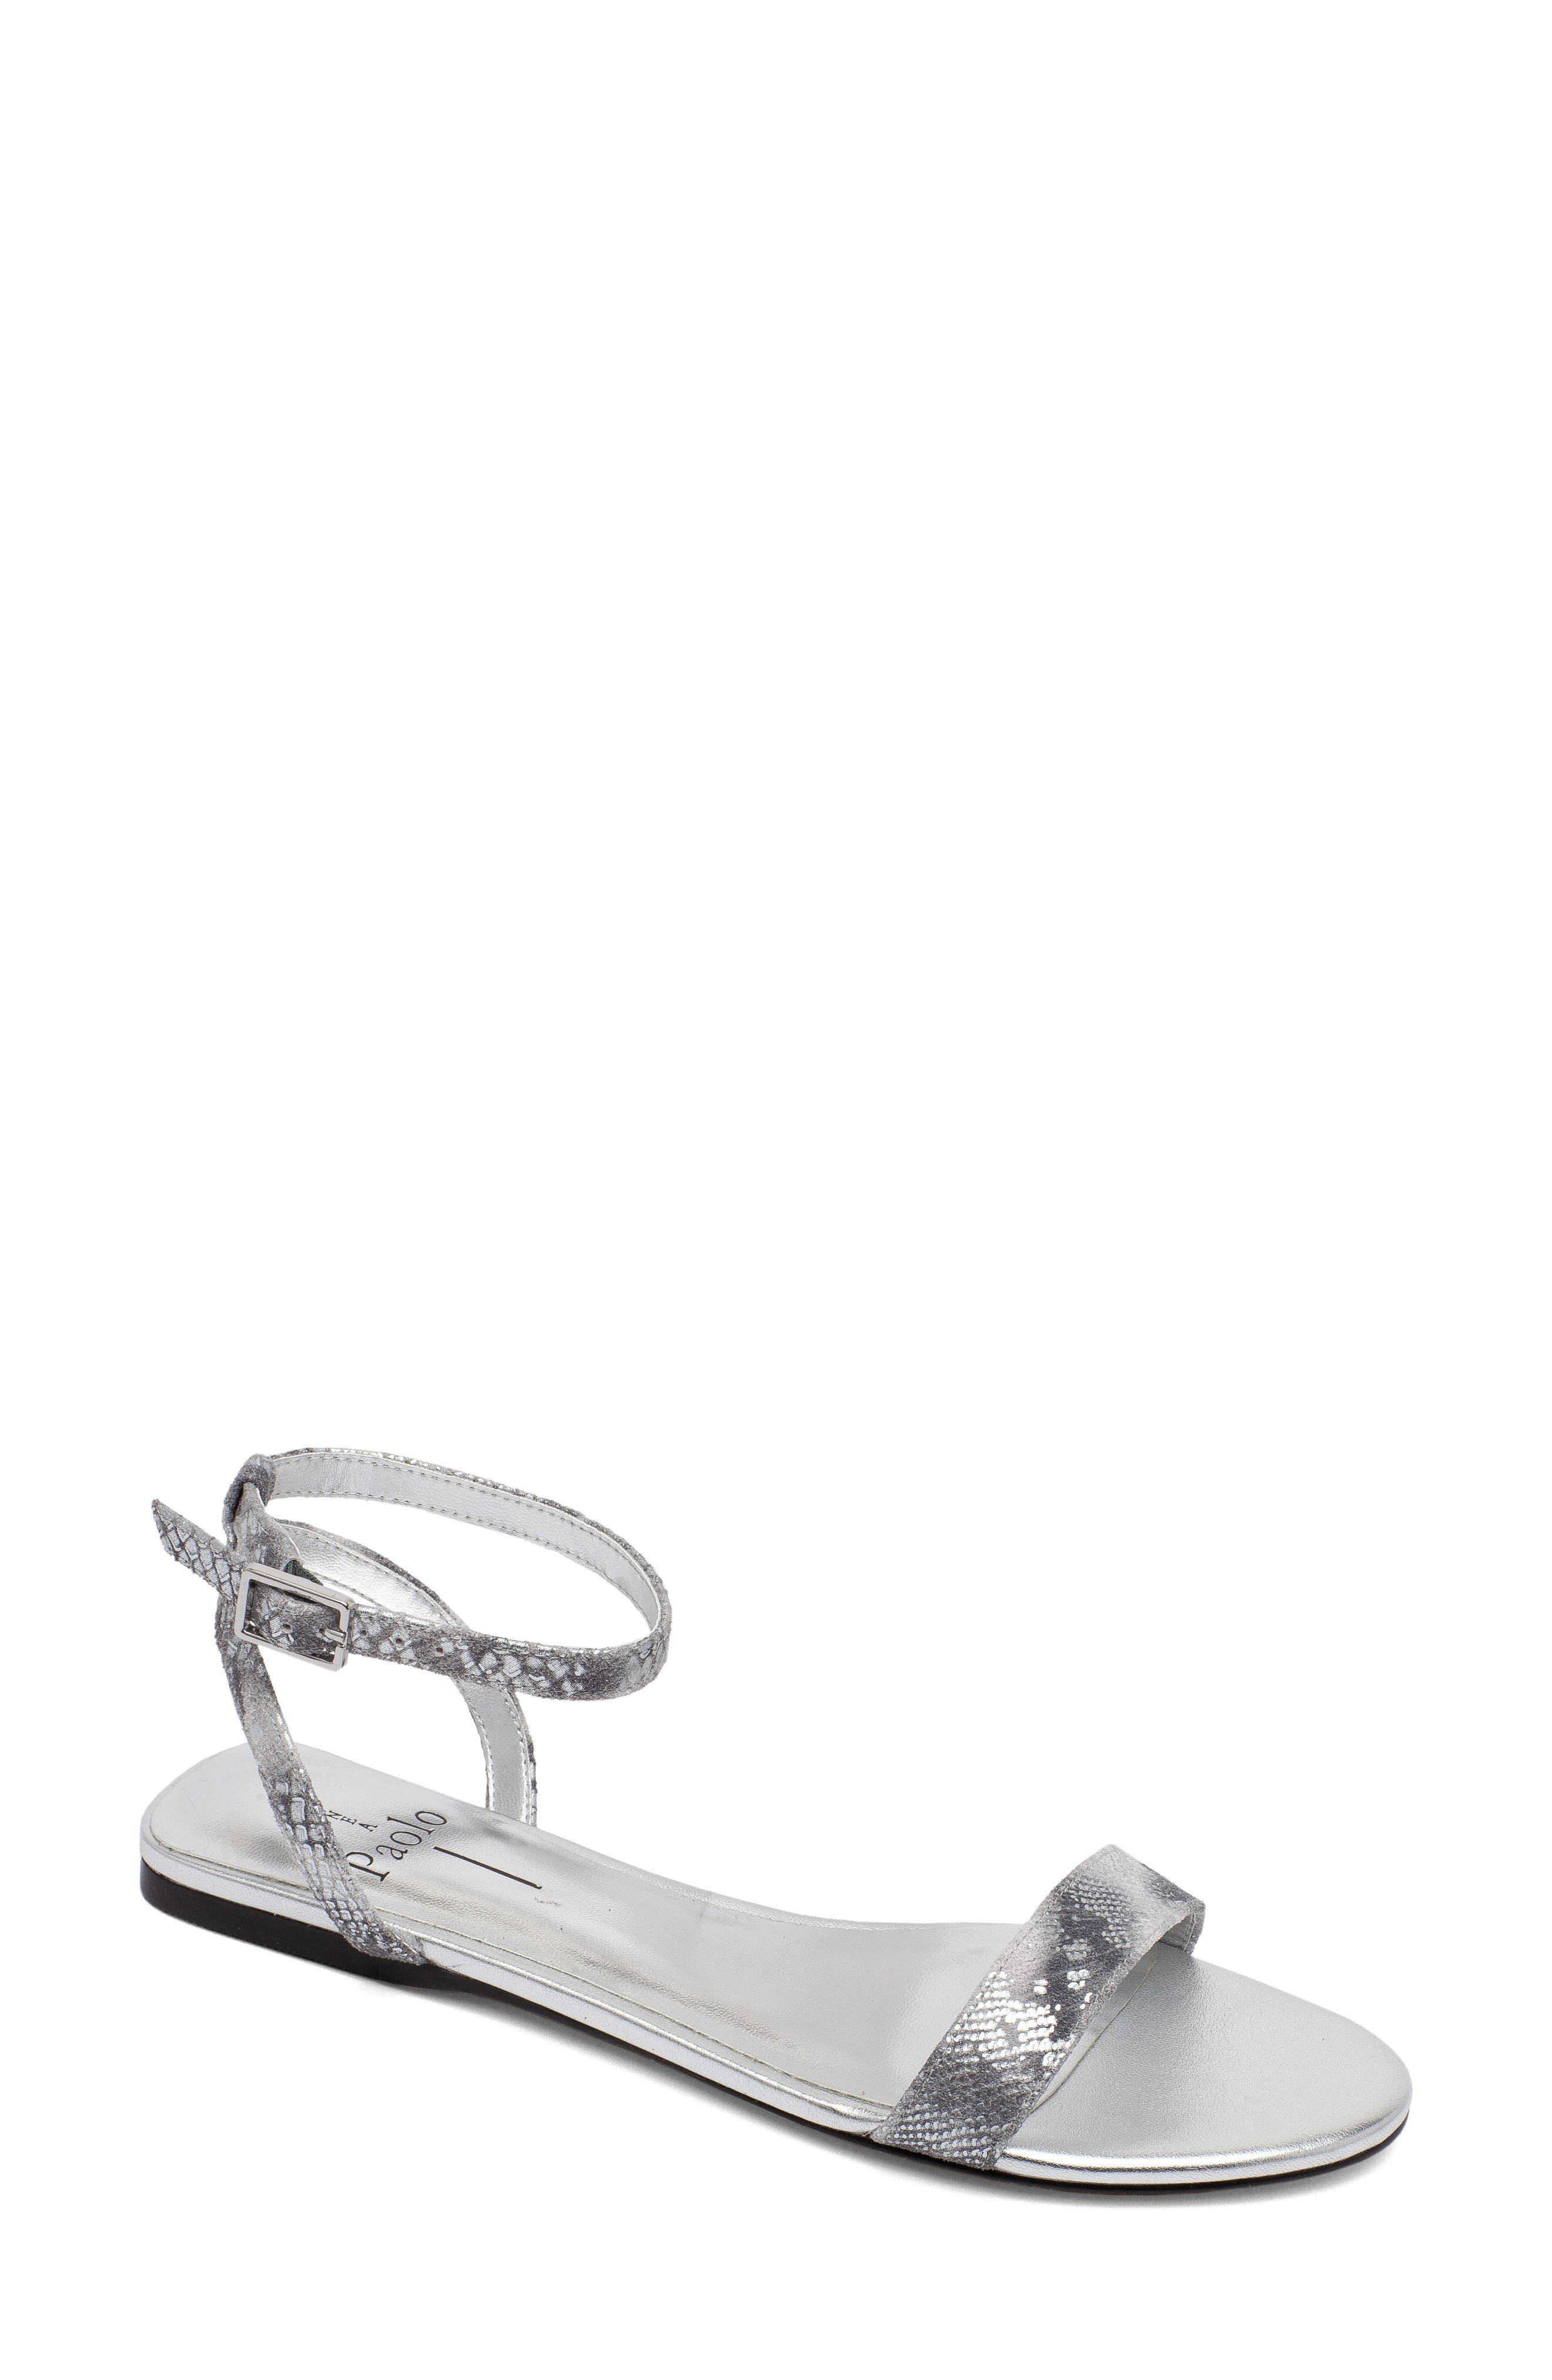 Linea Paolo Luela 2 Ankle Strap Sandal in White | Lyst